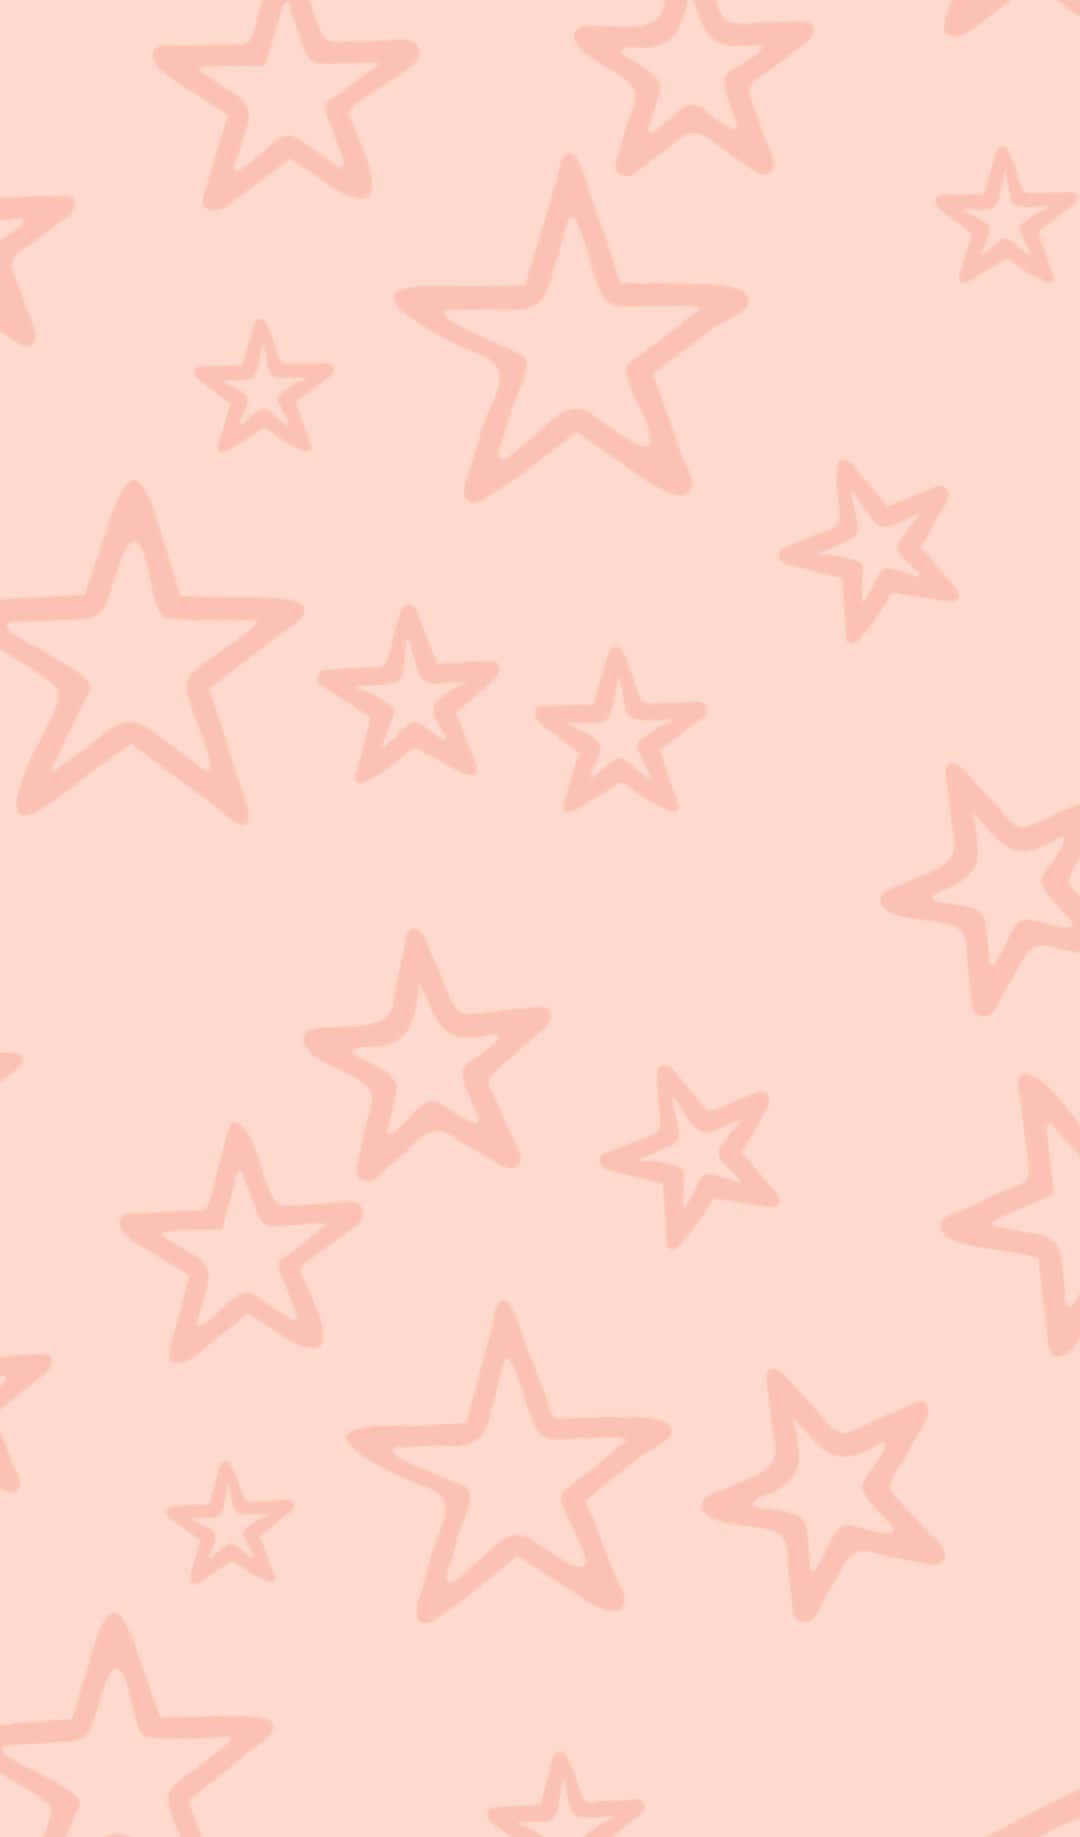 Shining Star in Aesthetically Pleasing Background Wallpaper